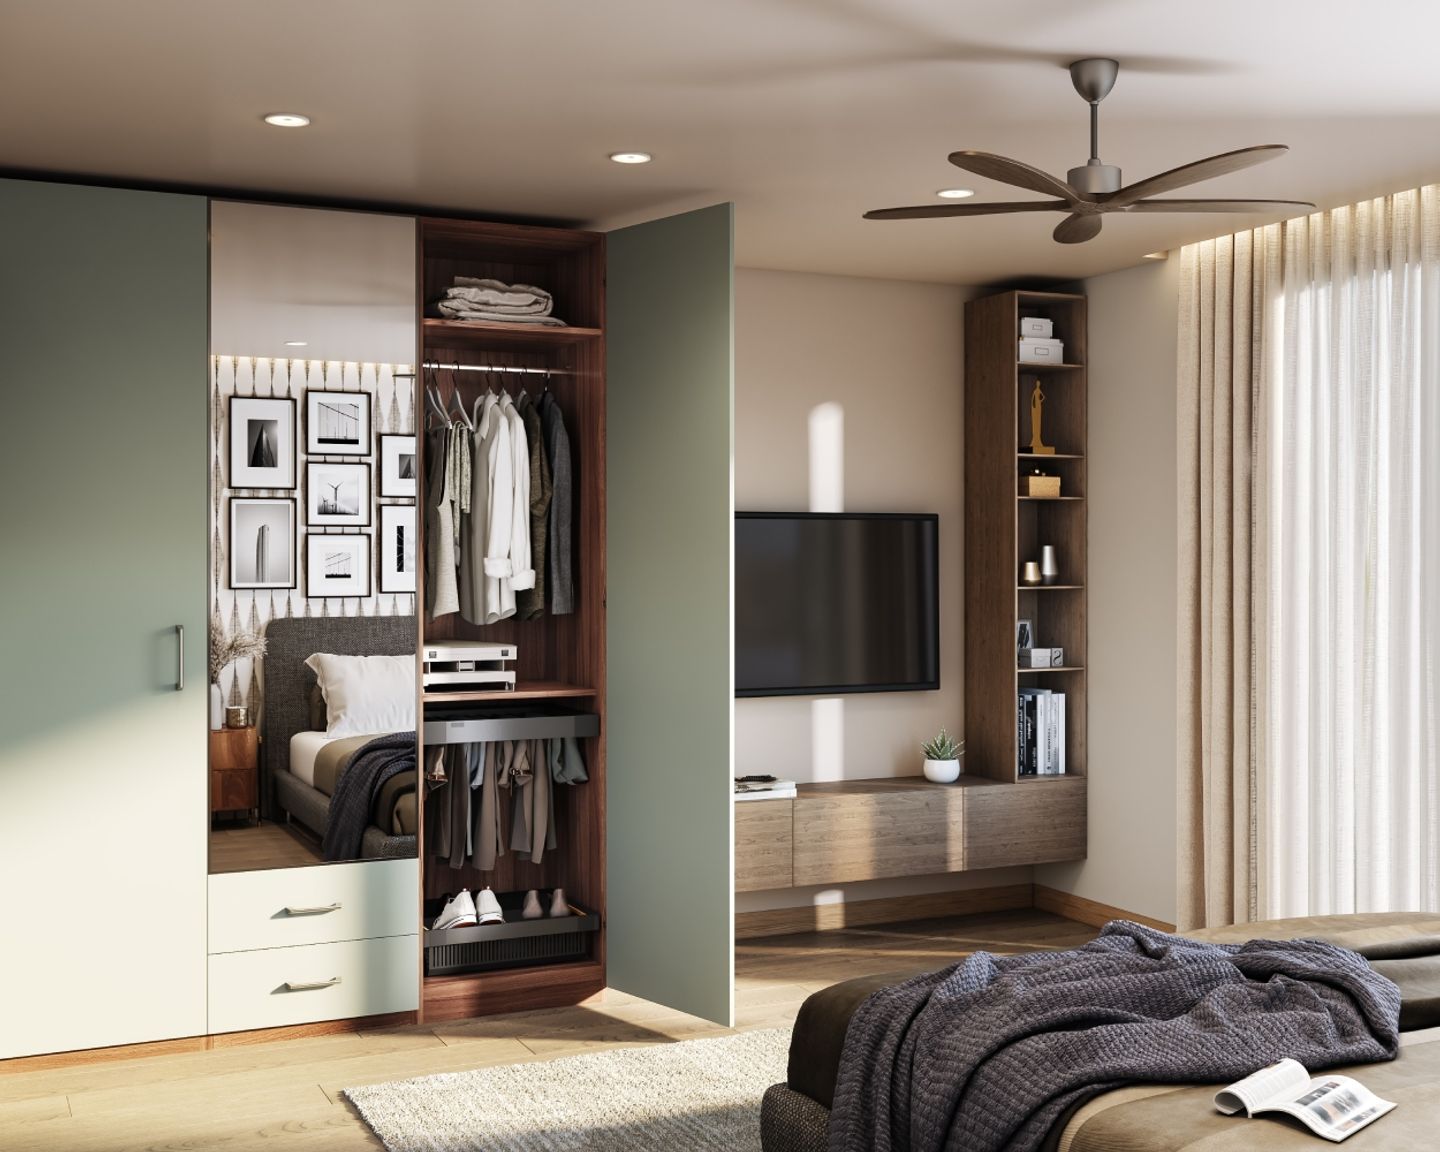 Blue And Brown 3-Door Swing Wardrobe Design With Mirror And Ample Storage Space - Livspace